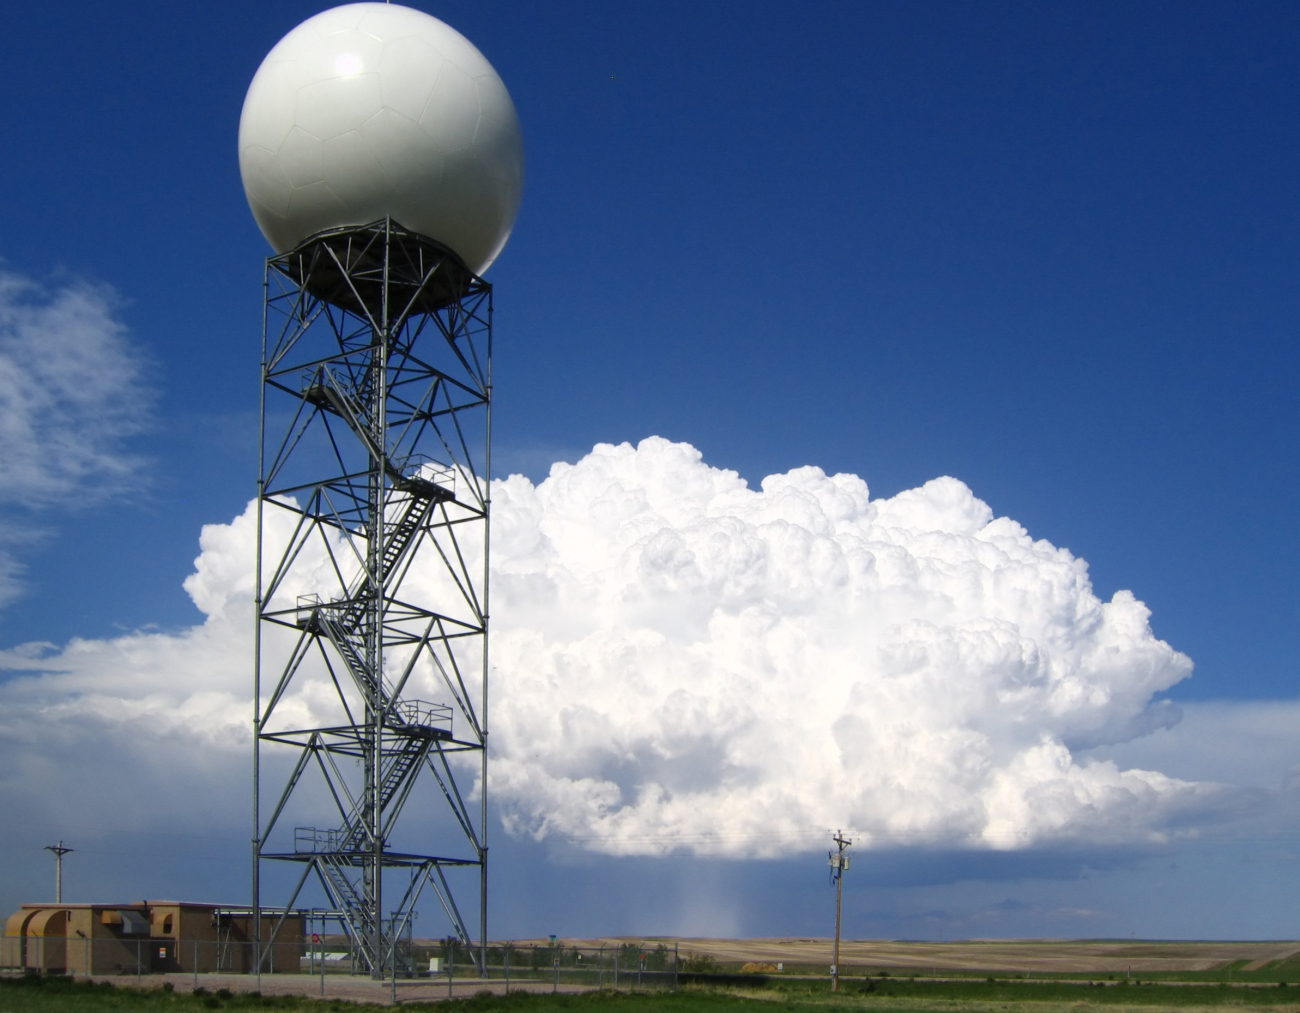 A strong supercell thunderstorm drops hail, with the WSR-88D Doppler radarat New Underwood, SD in the foreground